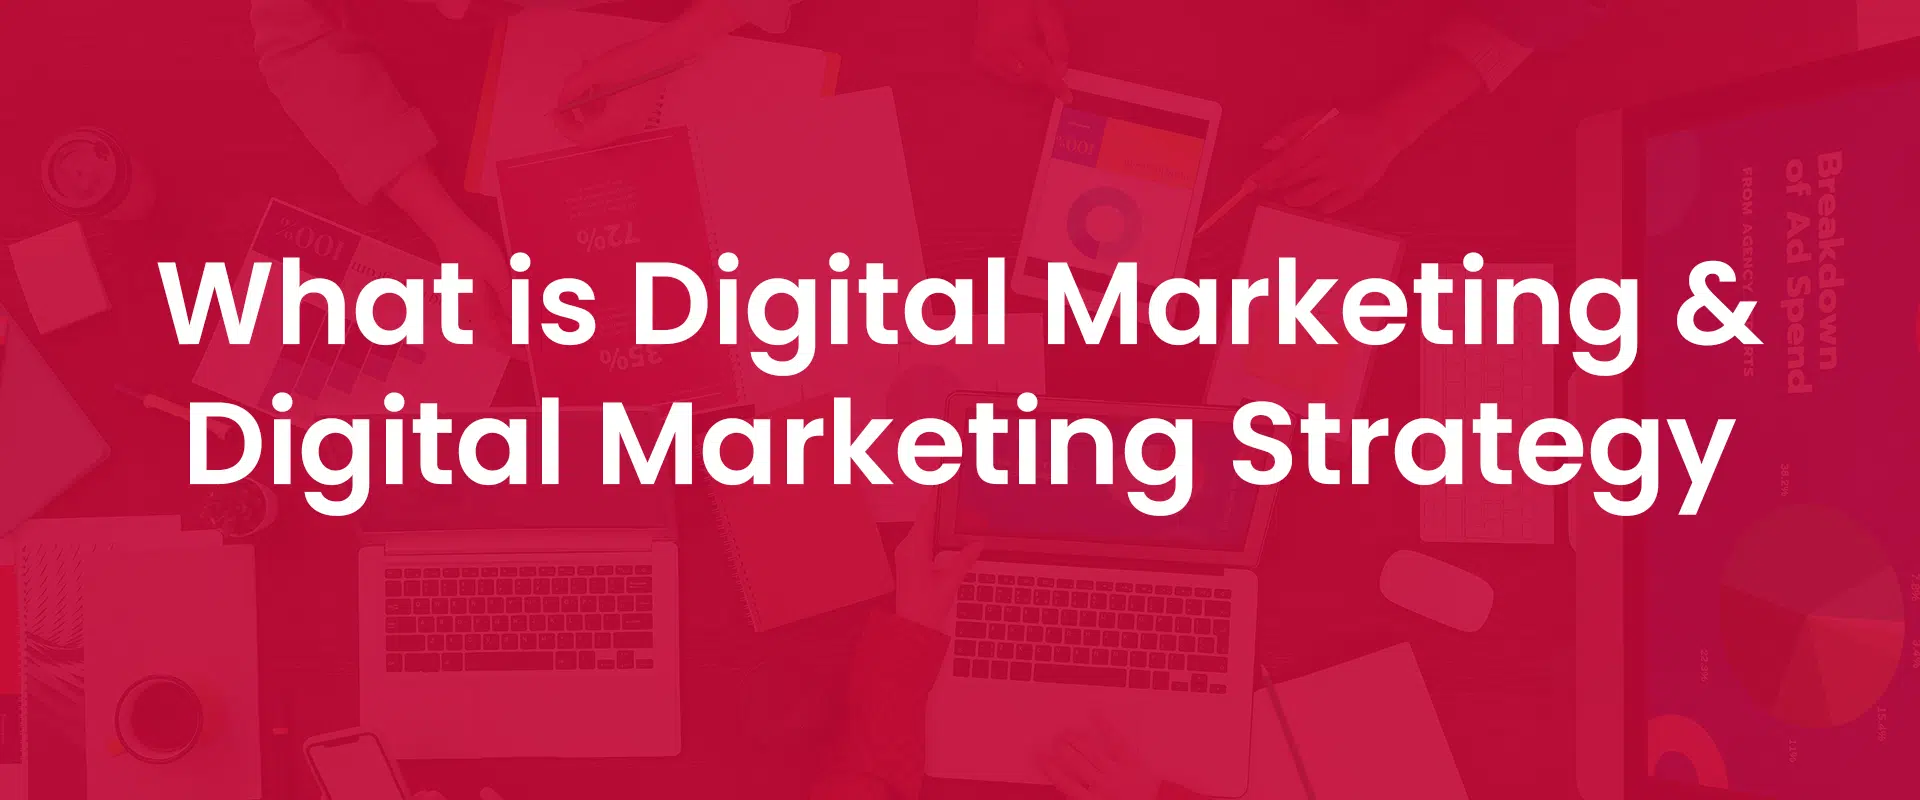 What is Digital Marketing & Digital Marketing Strategy cover